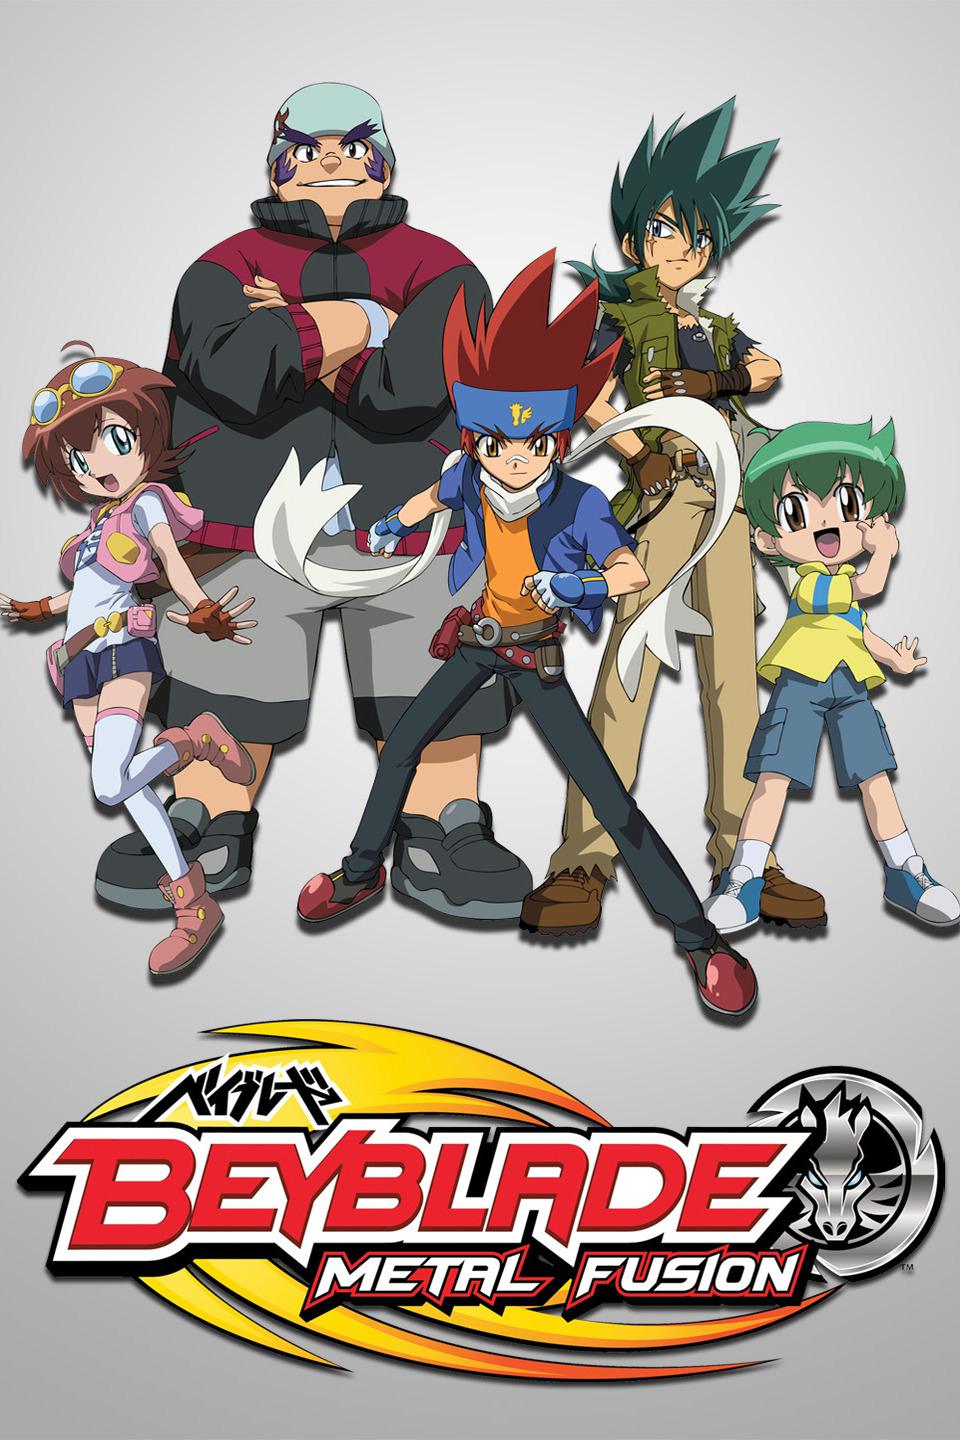 Beyblade: Metal Fusion (TV Tokyo): United States daily TV audience insights  for smarter content decisions - Parrot Analytics